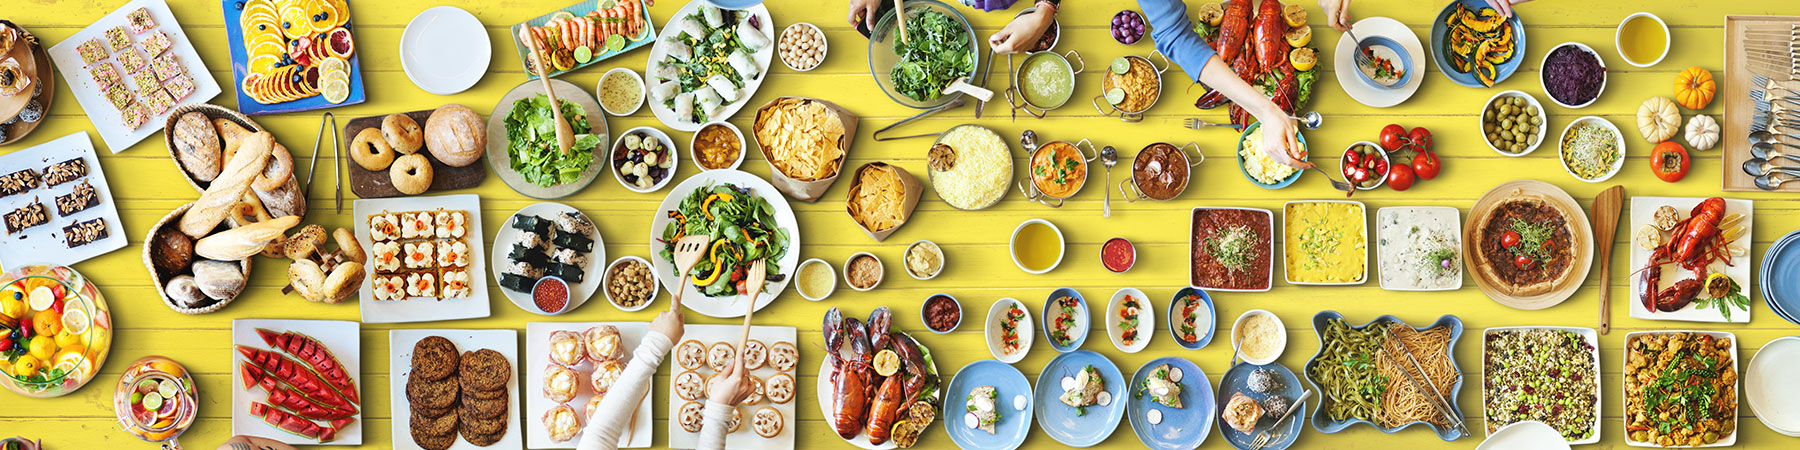 Yellow table filled with food